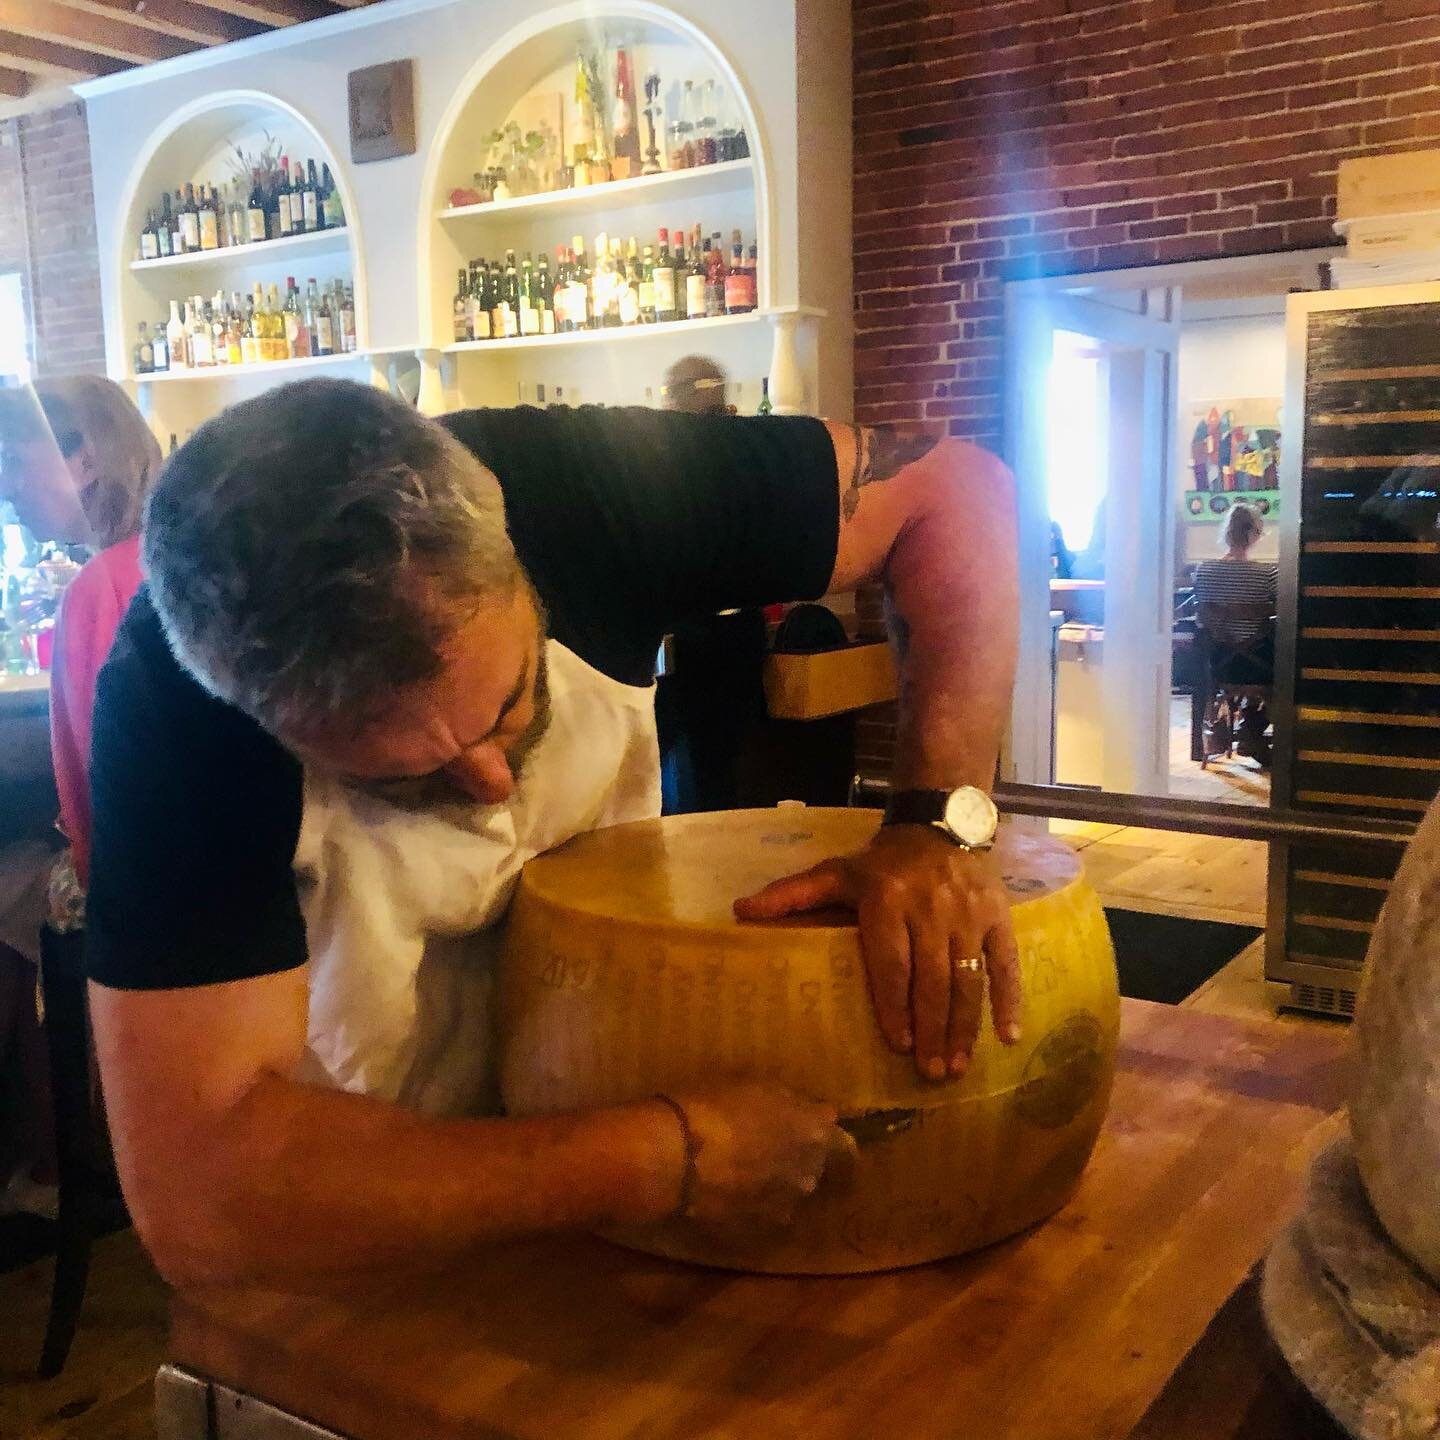 We asked our very first and most loyal guests (the chef&rsquo;s kiddos!) to show us dinner at Solo through their eyes. Not surprisingly, they captured their Papa in action opening a wheel of cheese, the bustle and blur of evening service, their favor